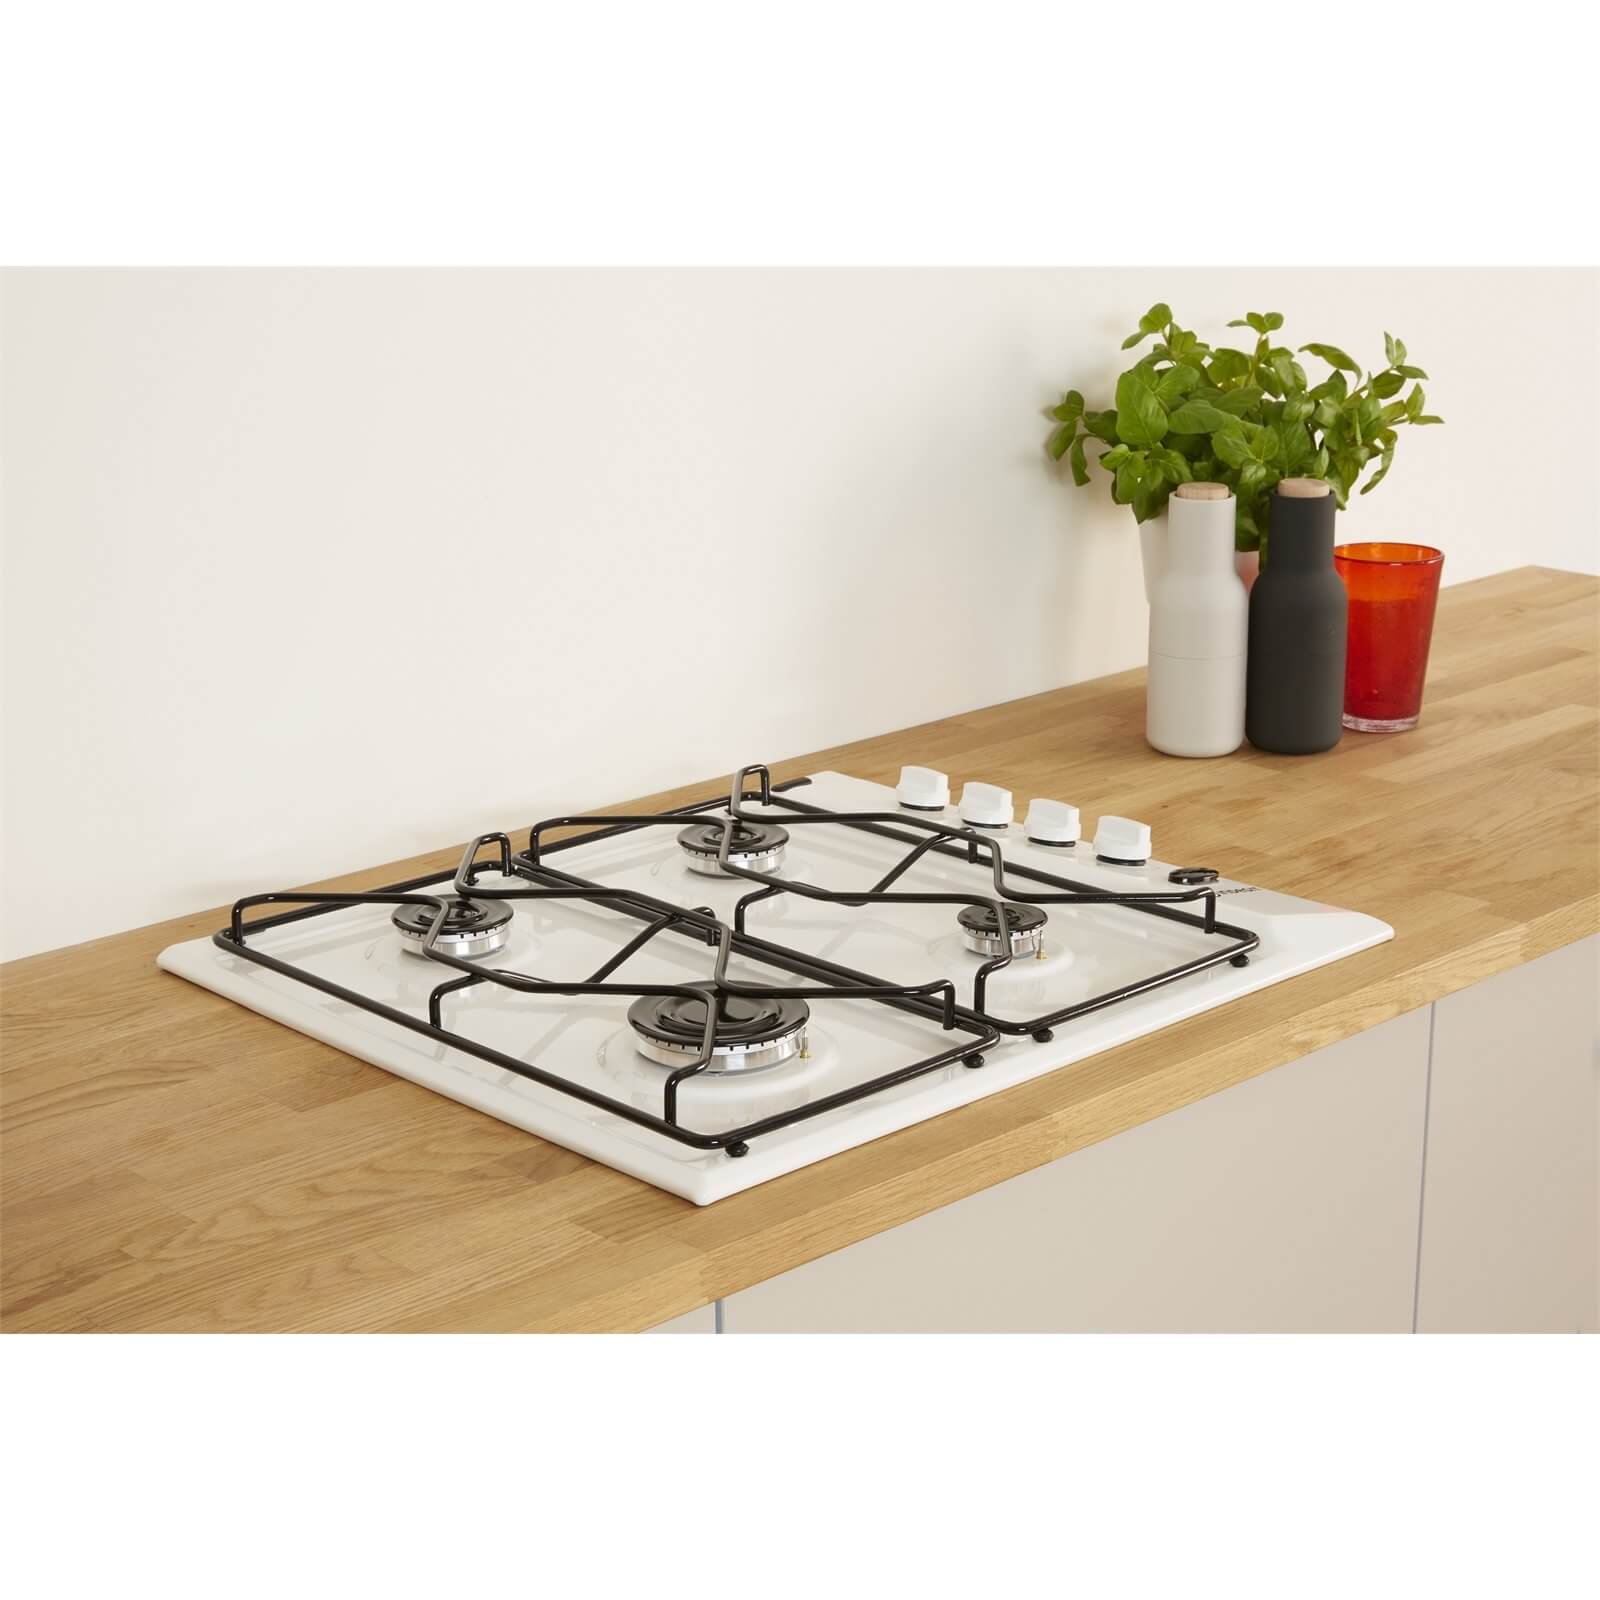 Indesit PAA 642 /I(WH) Gas Hob - White